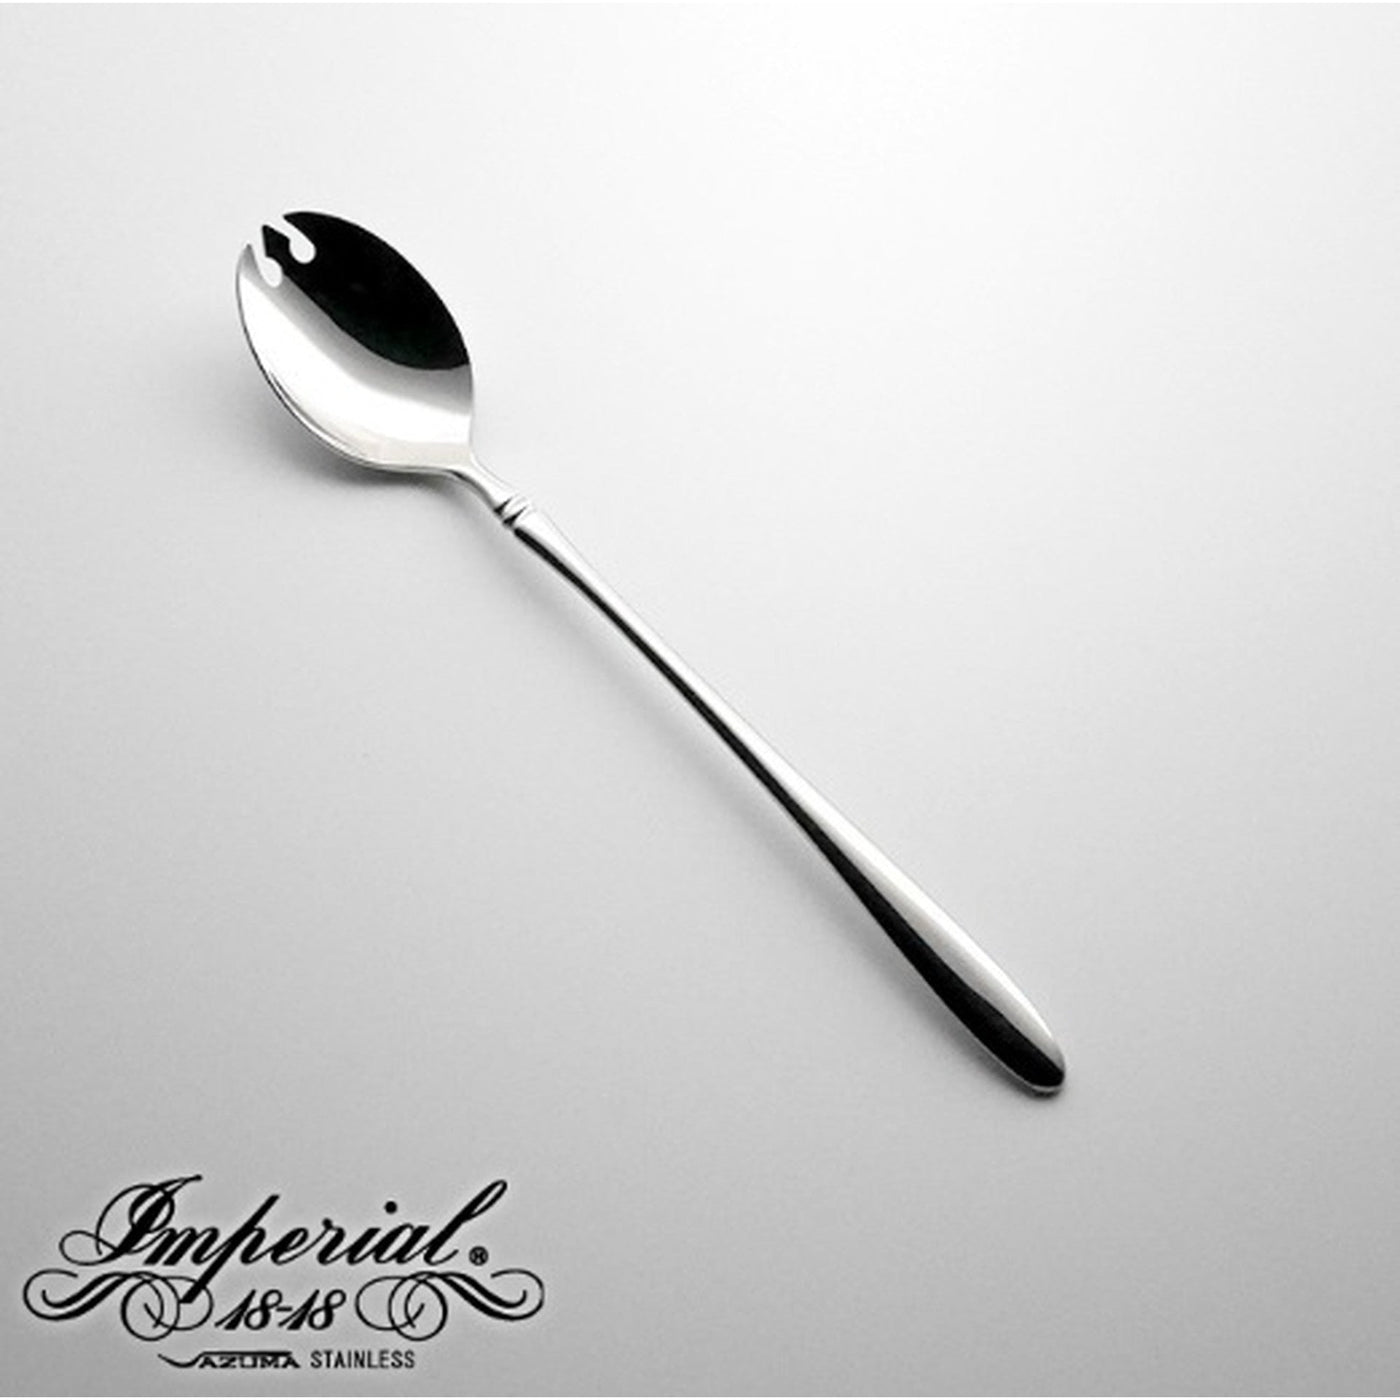 W-18 Imperial Melons Spoon